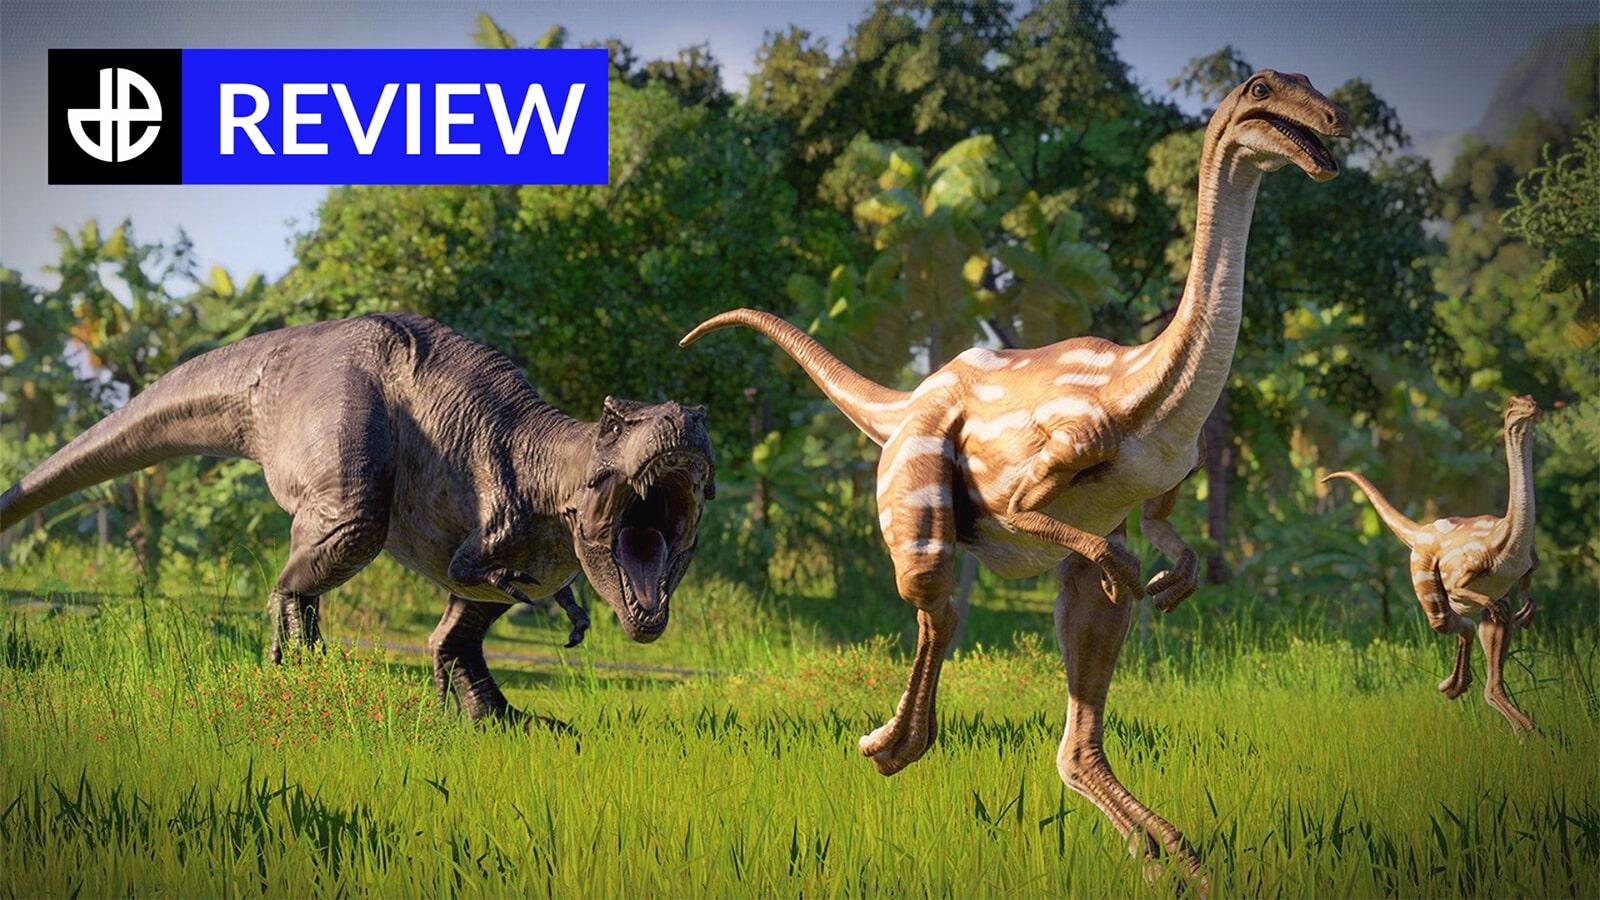 Jurassic World Evolution 2 Ps4 games Playstation 4 strategy age 16 +